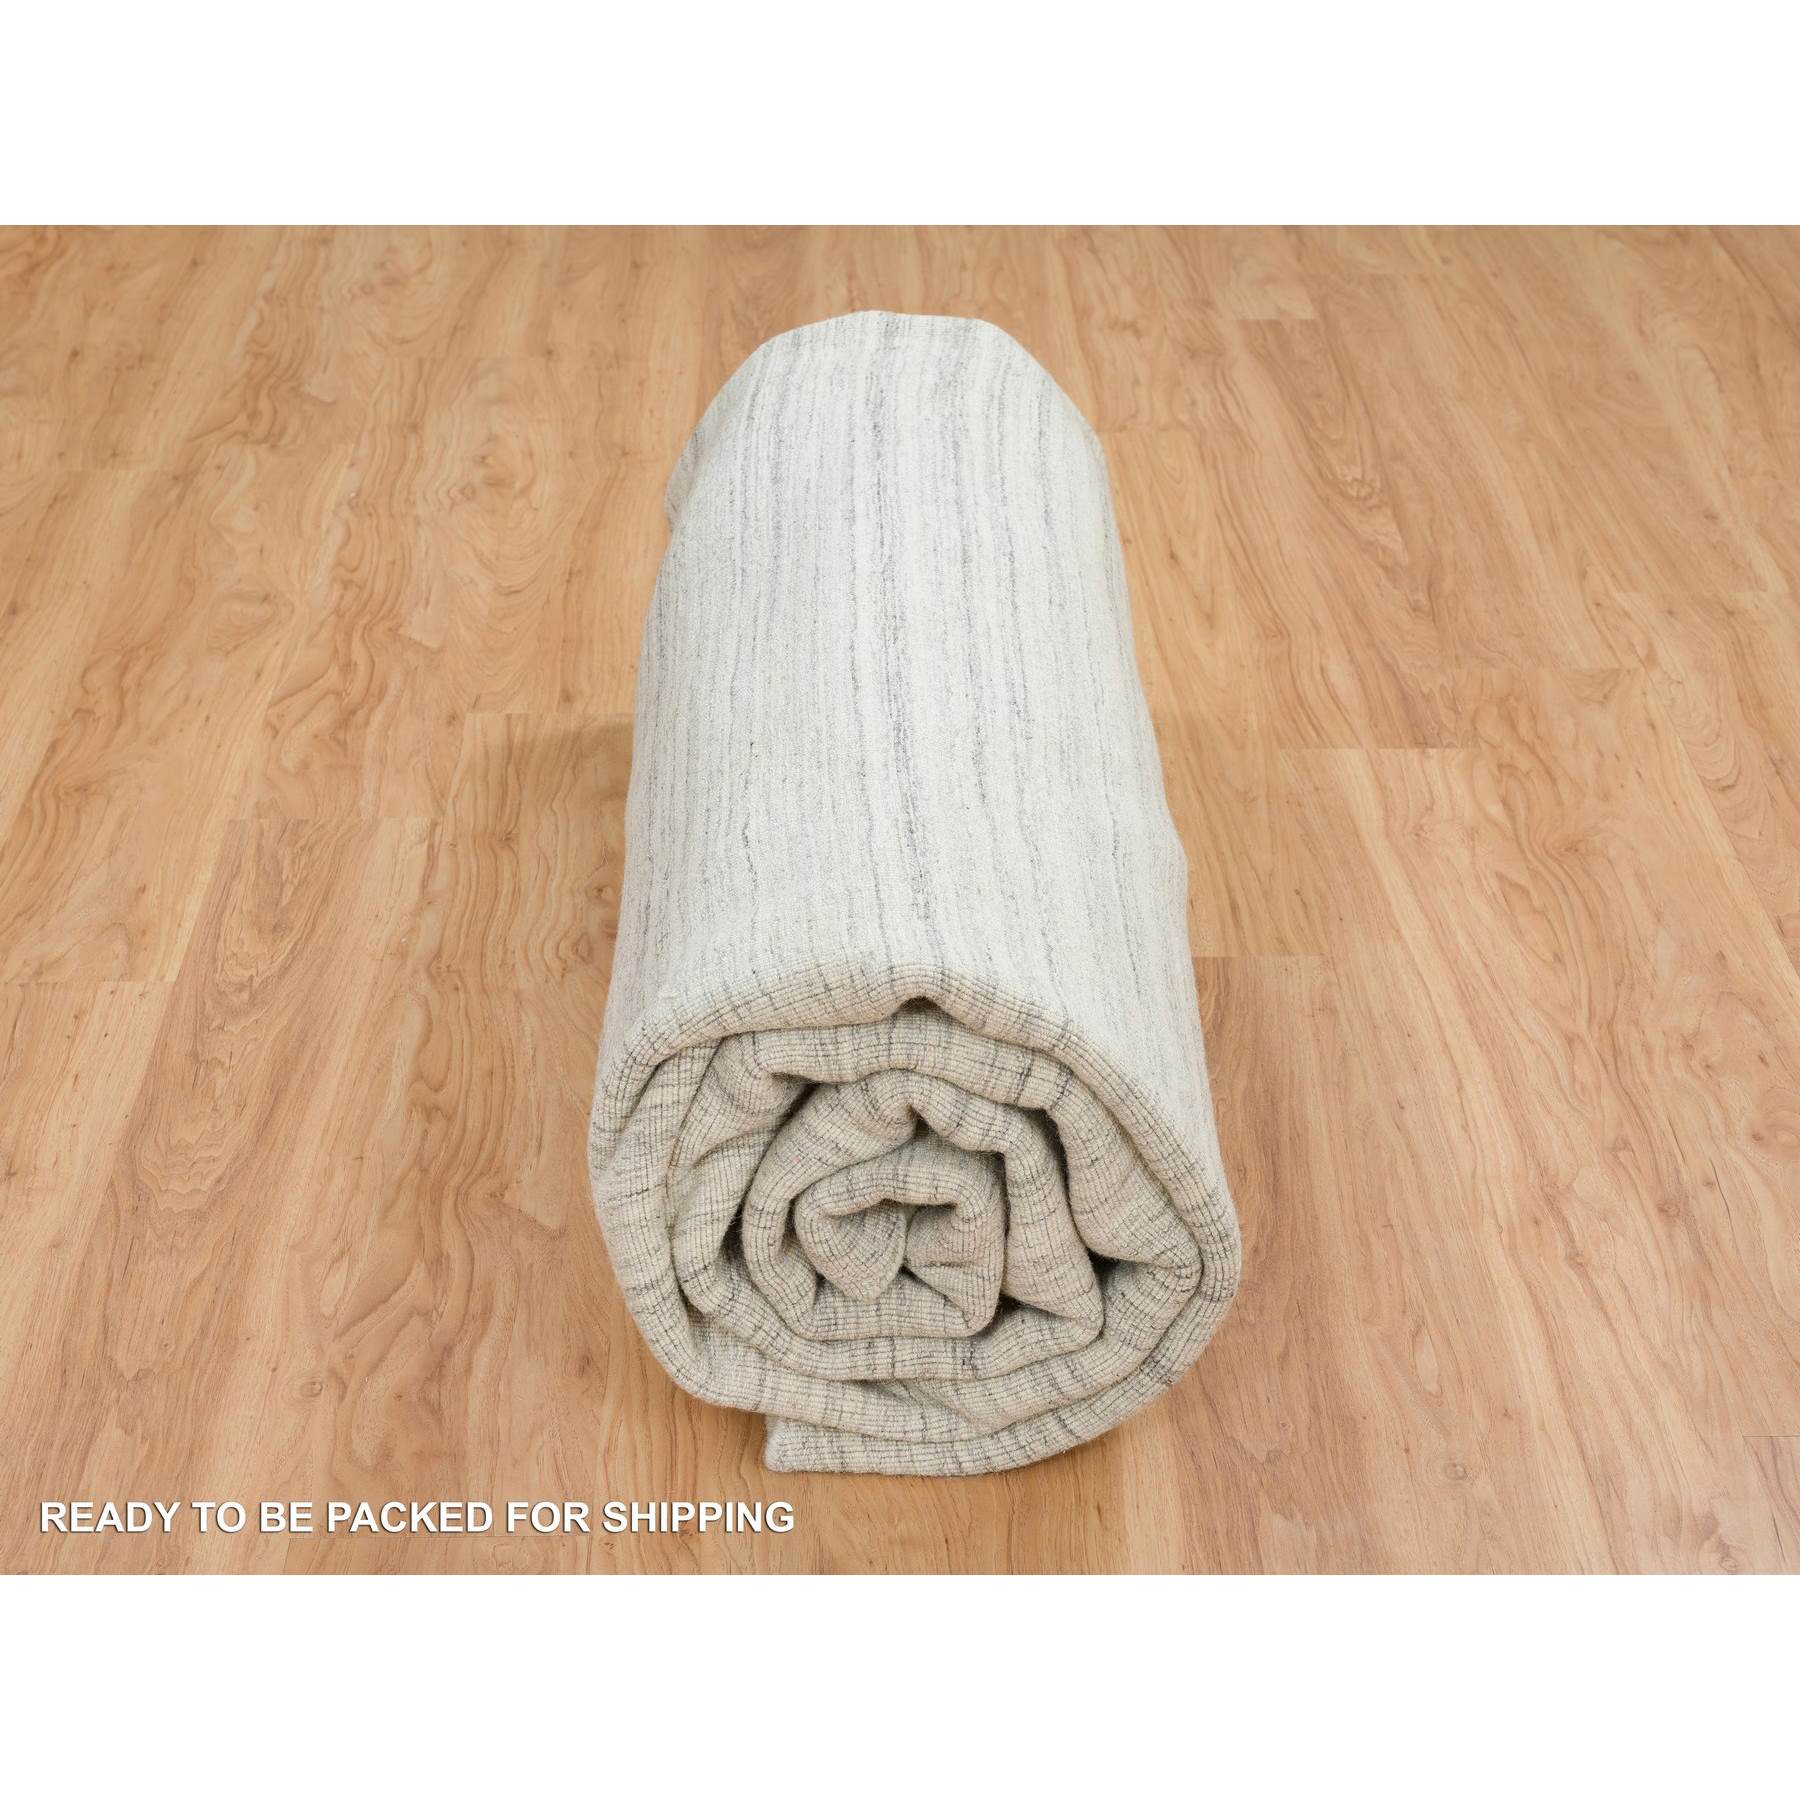 Modern-and-Contemporary-Hand-Loomed-Rug-325000